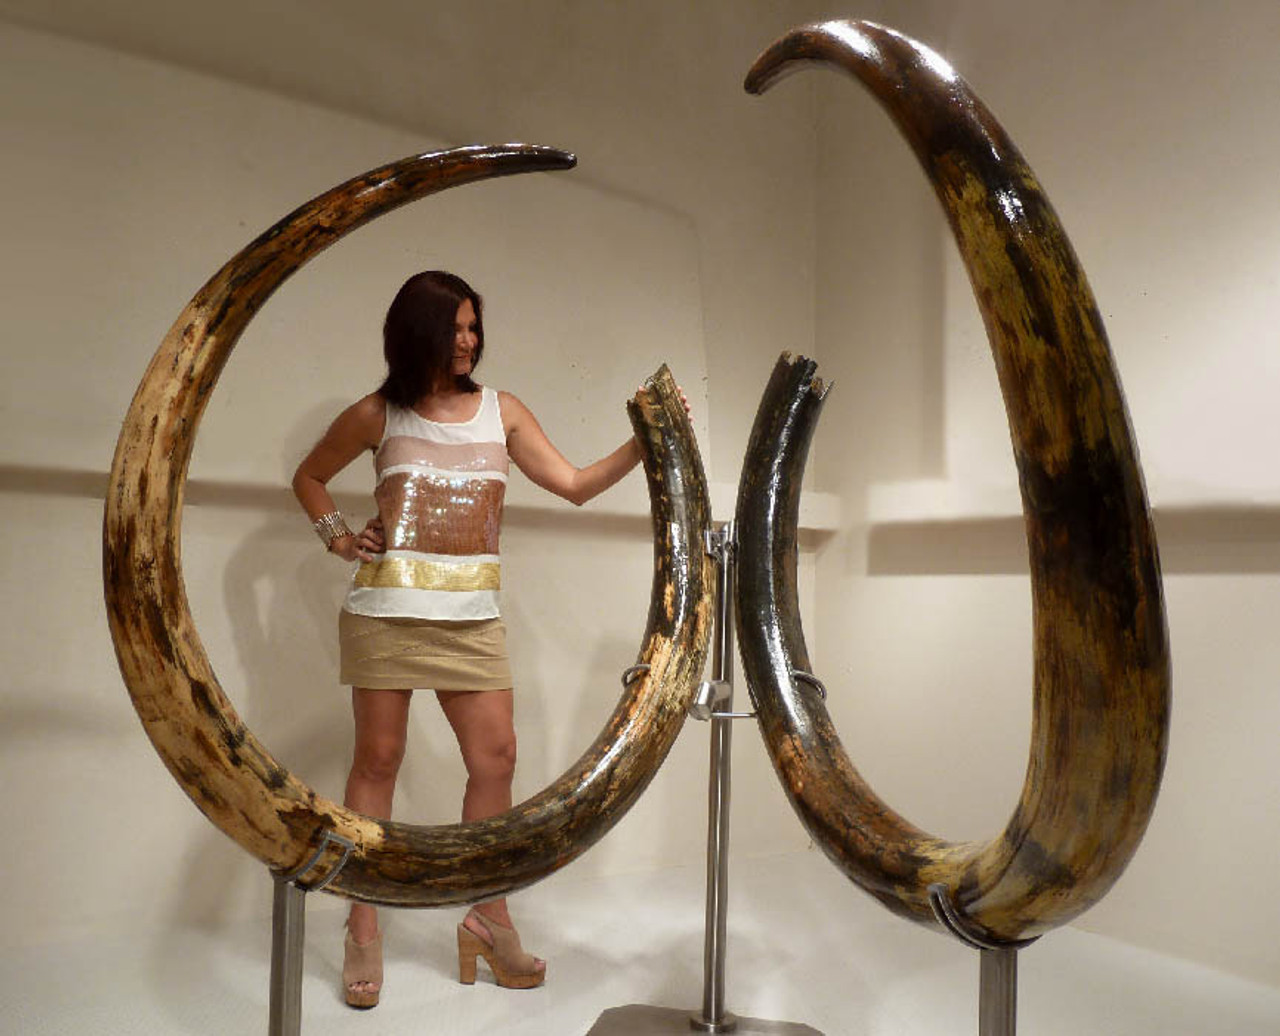 INVESTMENT-GRADE  LARGEST 11.5 FOOT PAIR OF WOOLLY MAMMOTH TUSKS FROM EUROPE'S FINAL ICE AGE *MTX001